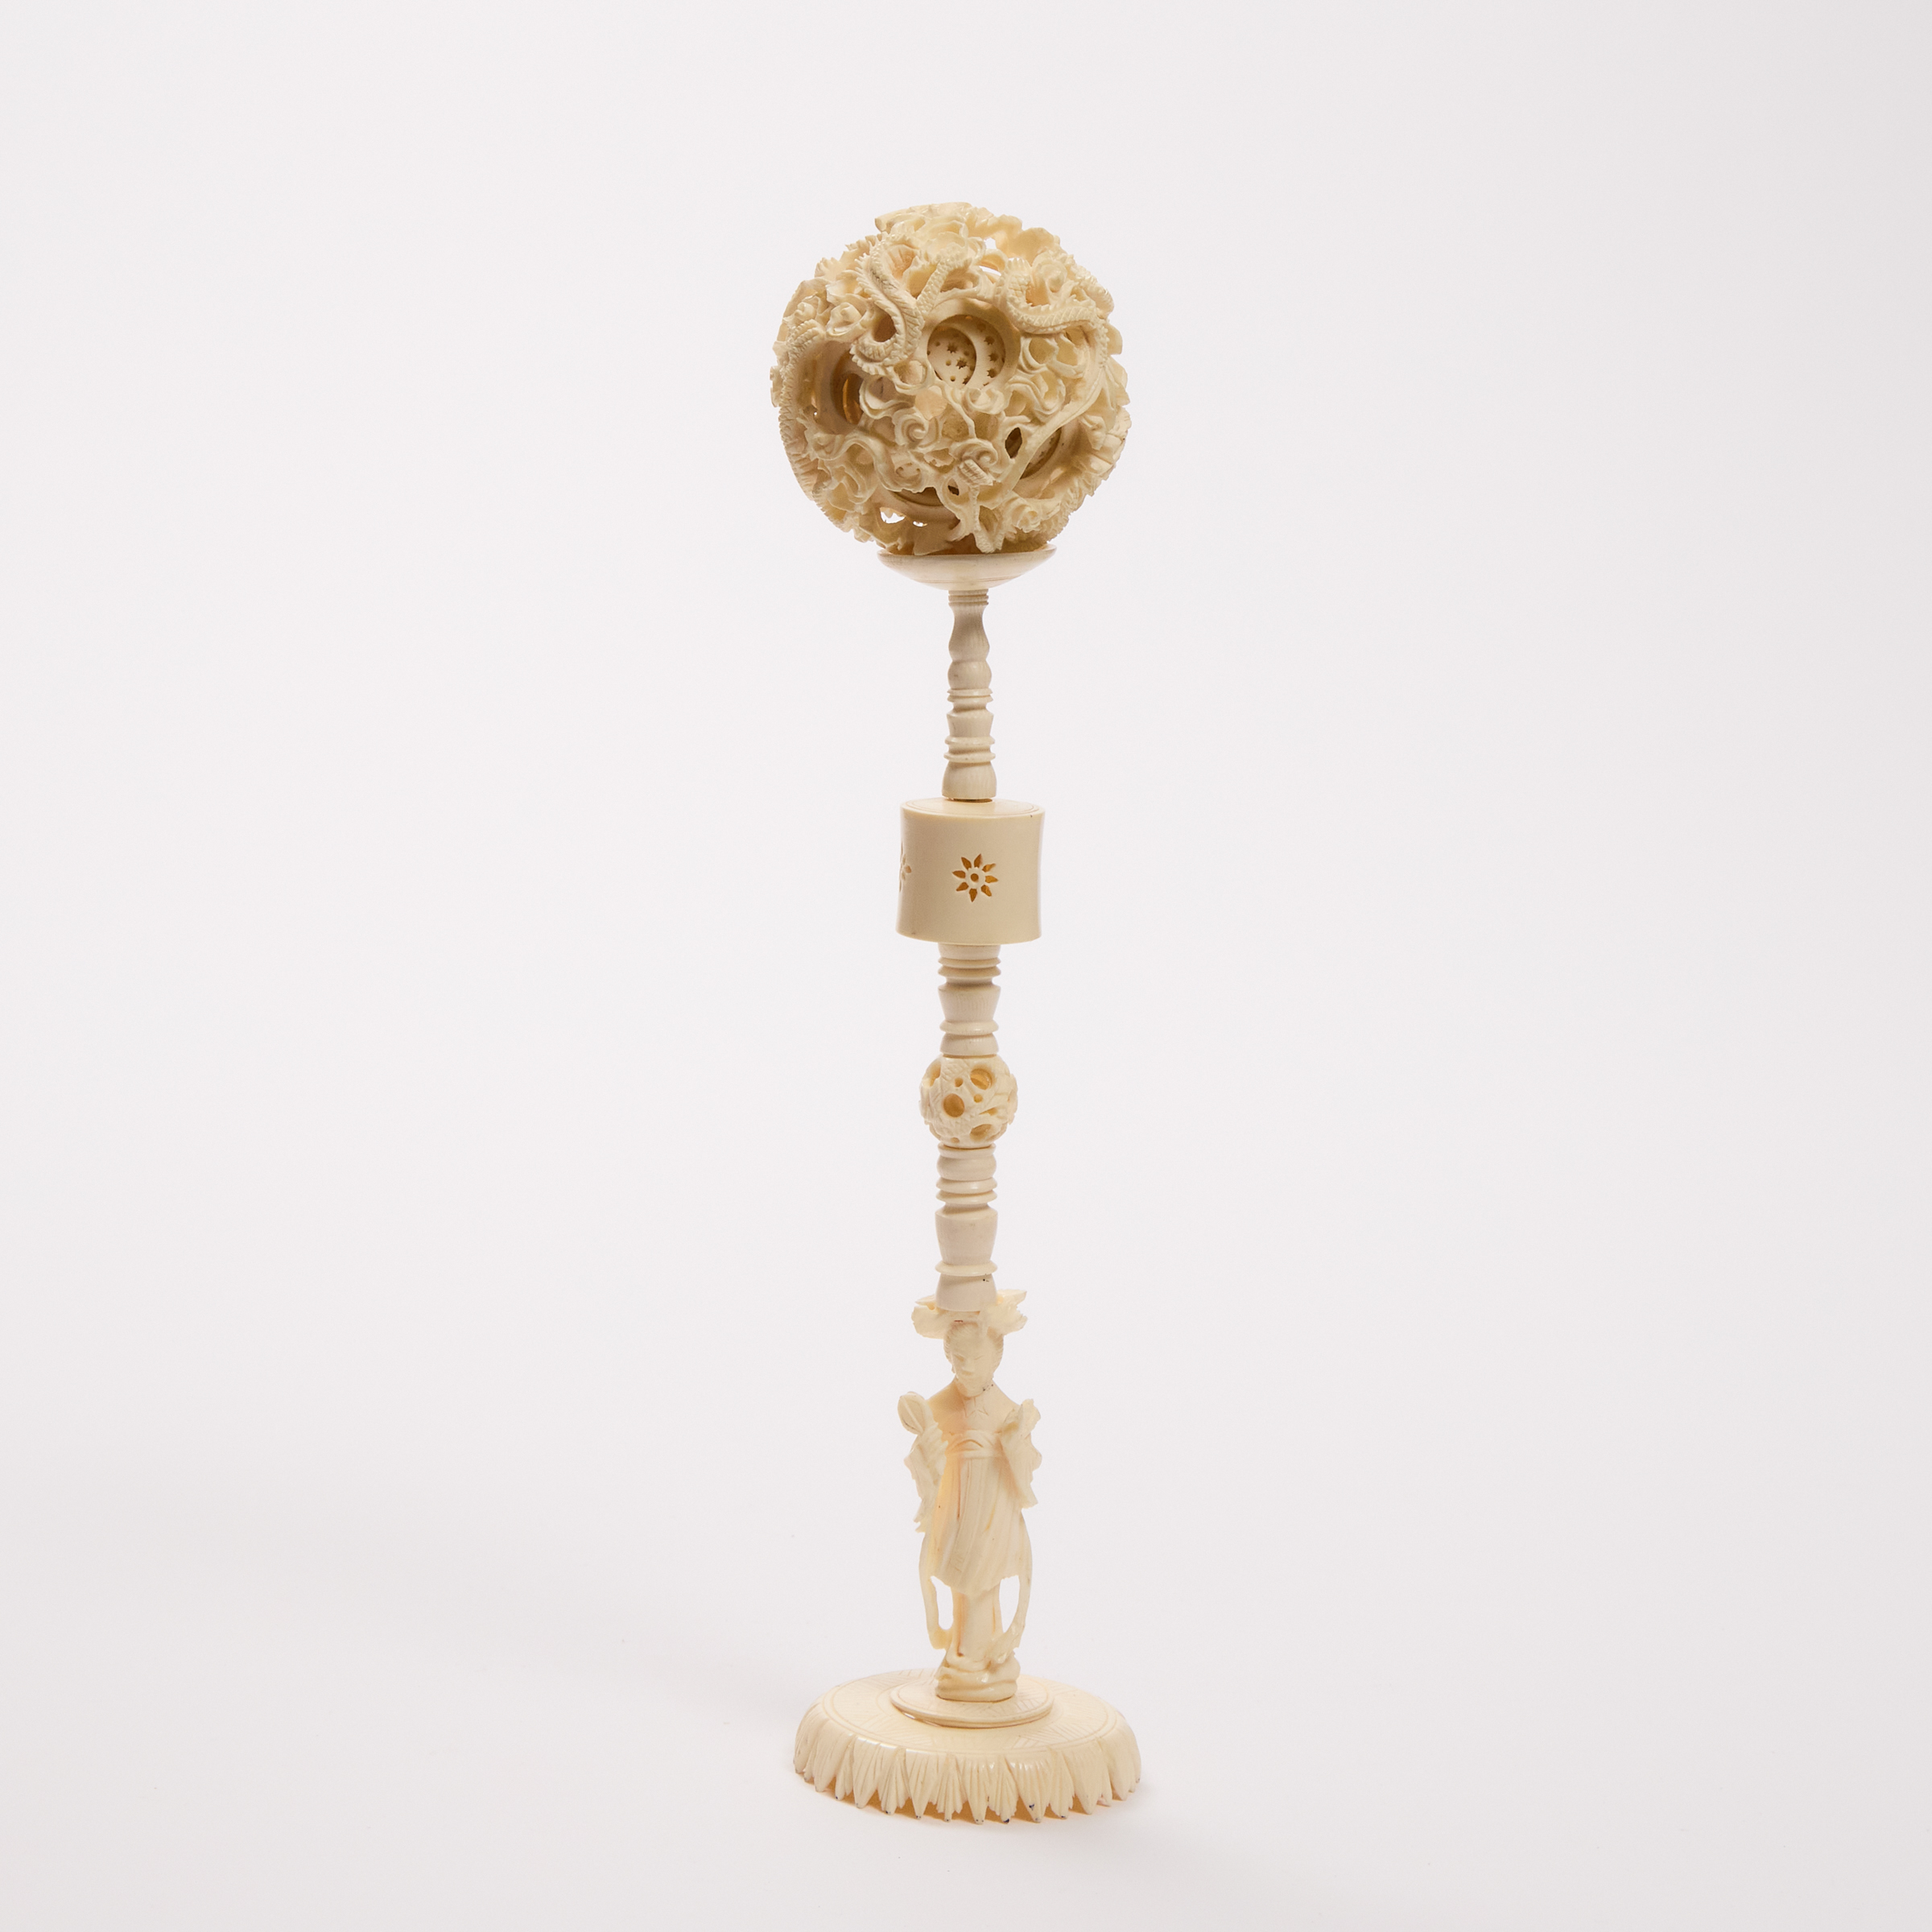 An Ivory Puzzle Ball and Stand, Republican